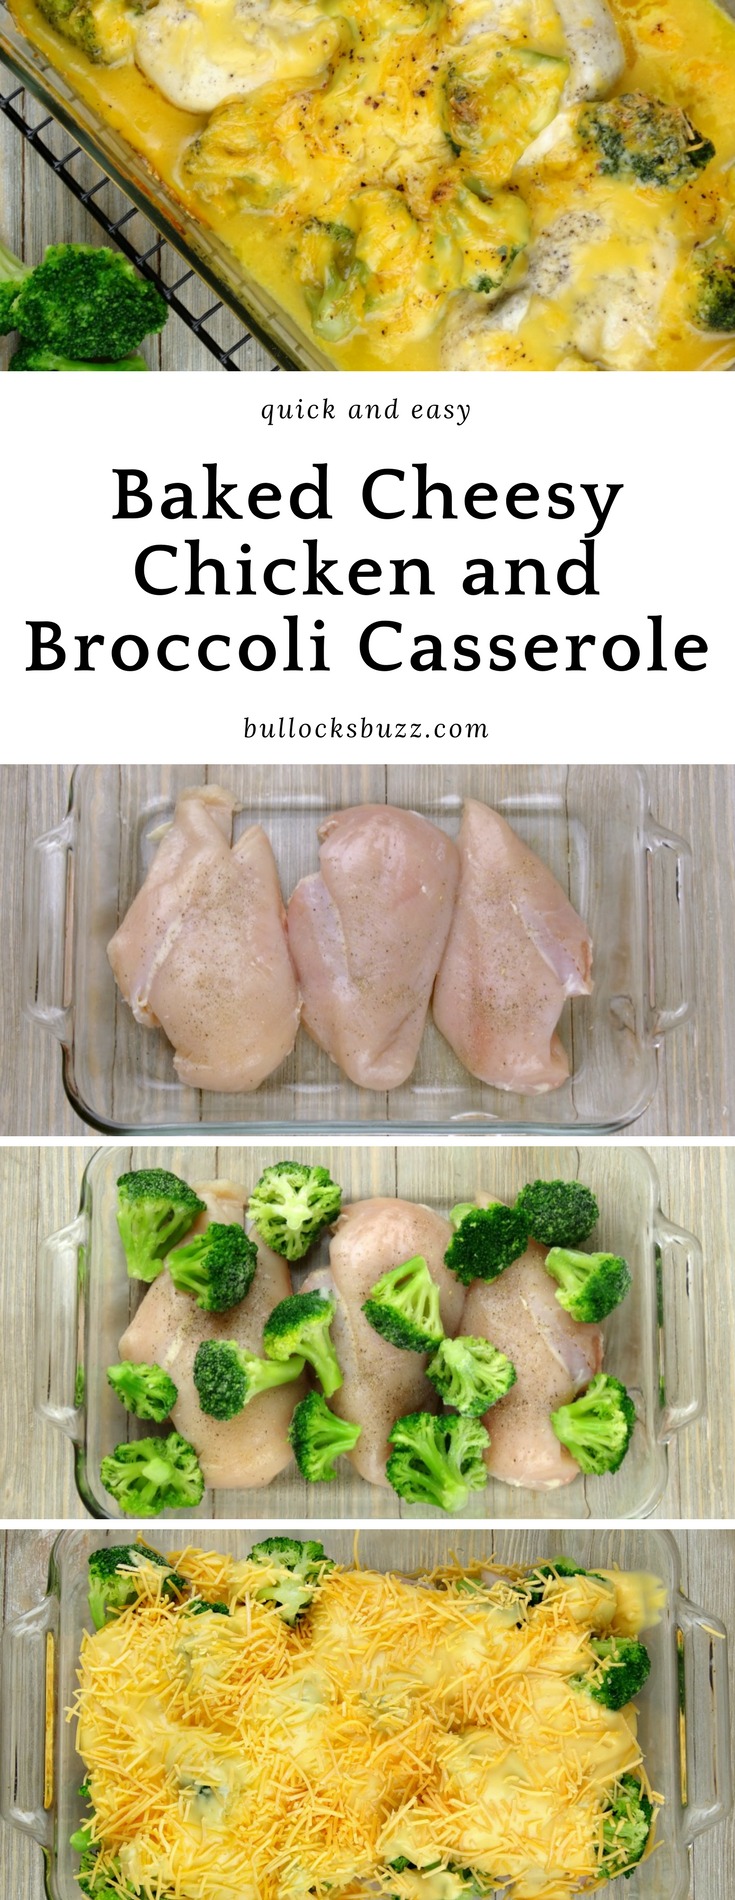 If you like chicken, broccoli and cheese, you are going to love this Baked Cheesy Chicken Broccoli Casserole where tender, juicy chicken breasts and crunchy broccoli florets are covered with a rich, aged cheddar cheese sauce. This scrumptious casserole is sure to become a family favorite!